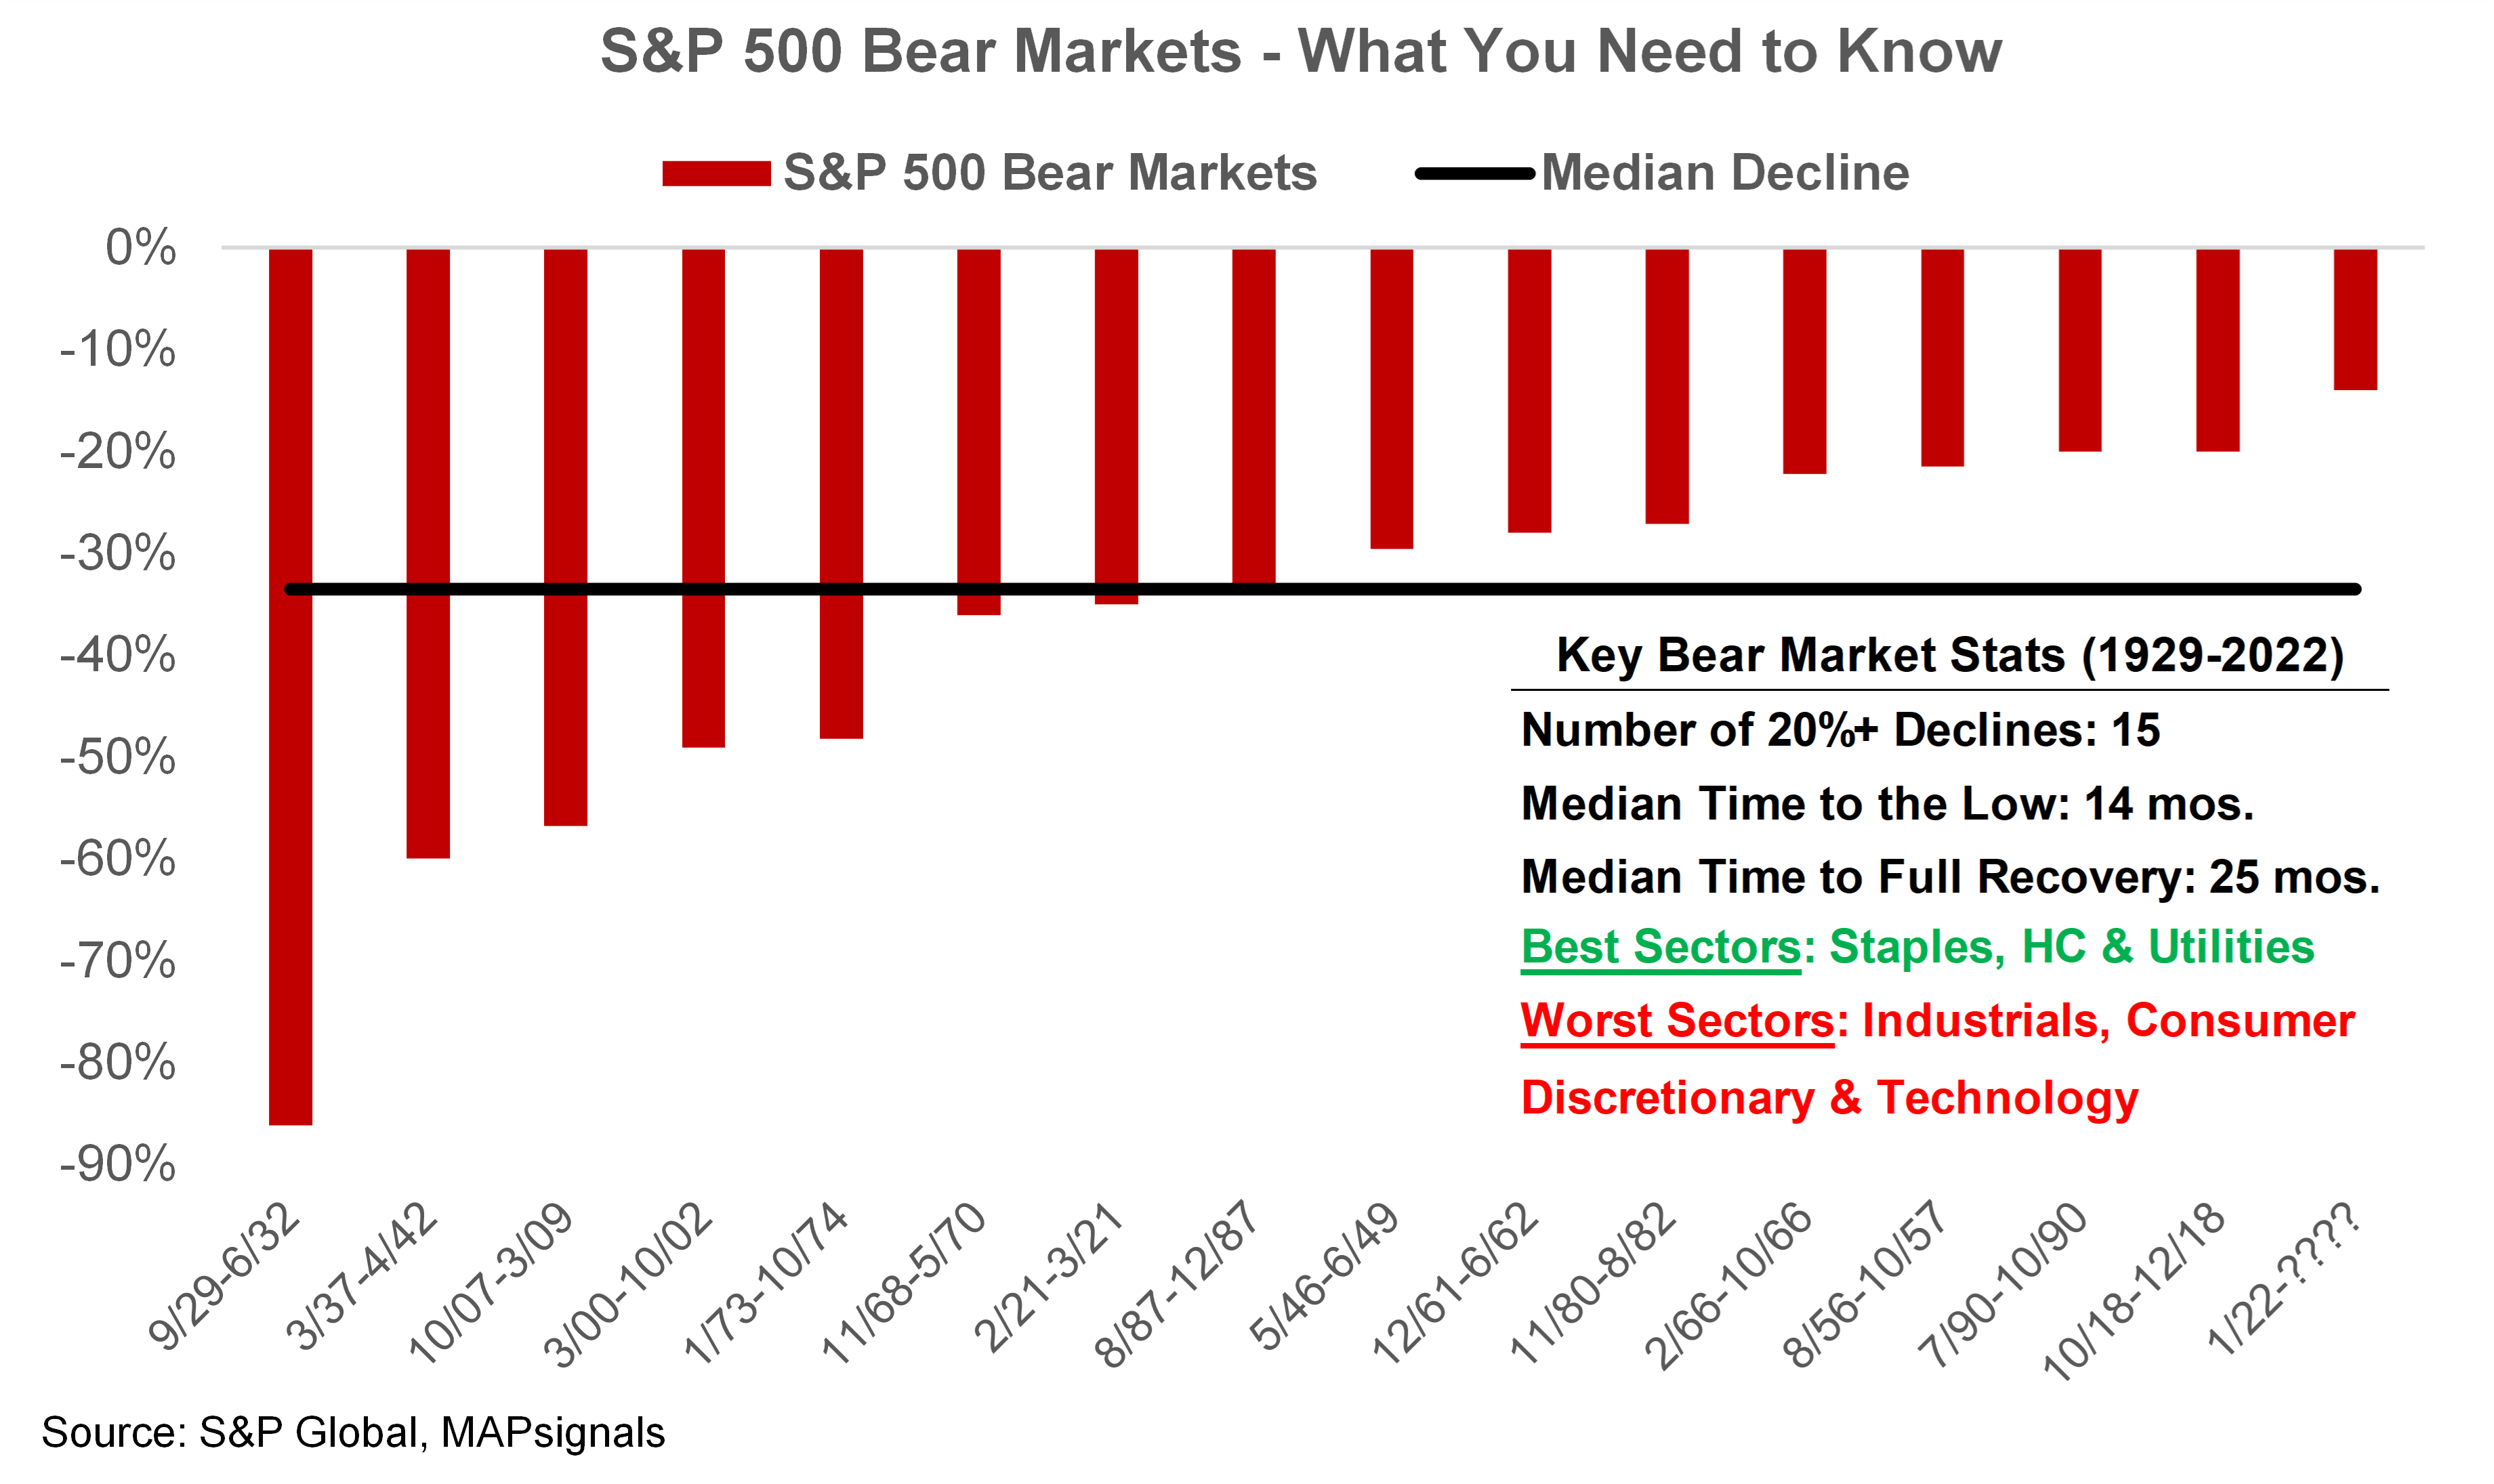 S&P 500 Bear Markets - What You Need to Know